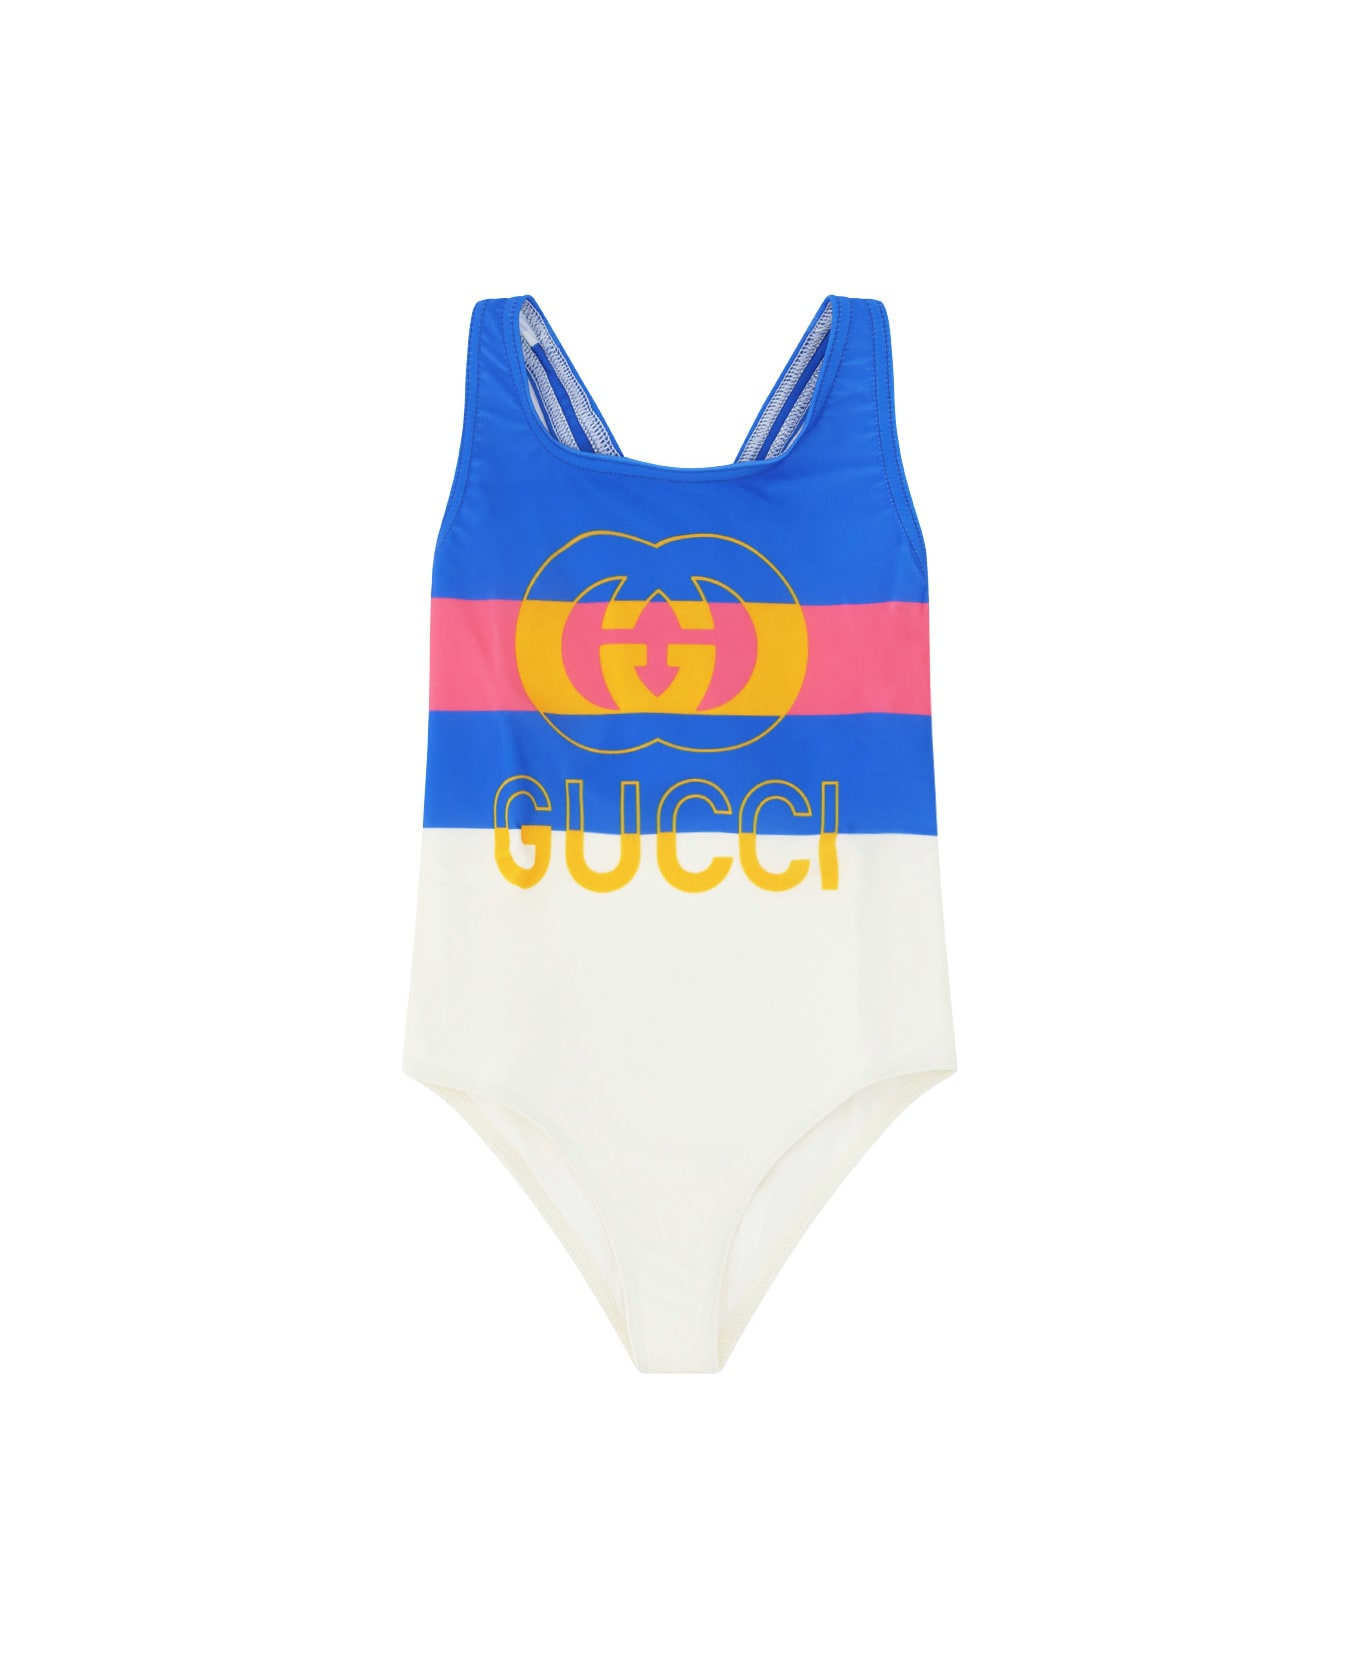 Gucci Swimsuit For Girl - Sunkissed/blue